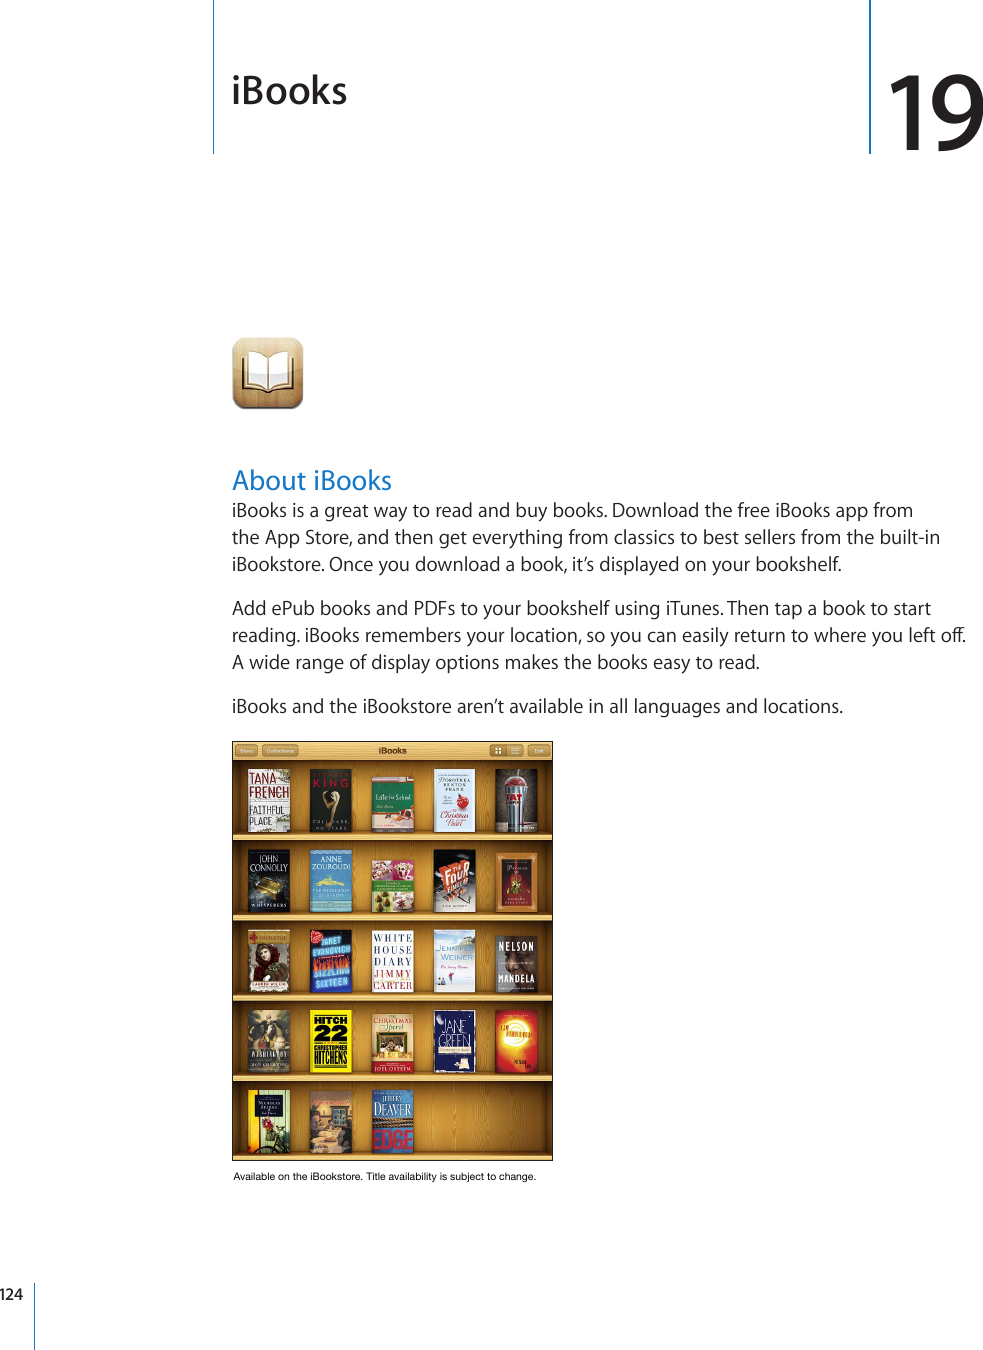 iBooks 19About iBooksiBooks is a great way to read and buy books. Download the free iBooks app from the App Store, and then get everything from classics to best sellers from the built-in iBookstore. Once you download a book, it’s displayed on your bookshelf.Add ePub books and PDFs to your bookshelf using iTunes. Then tap a book to start TGCFKPIK$QQMUTGOGODGTU[QWTNQECVKQPUQ[QWECPGCUKN[TGVWTPVQYJGTG[QWNGHVQÒA wide range of display options makes the books easy to read.iBooks and the iBookstore aren’t available in all languages and locations.(]HPSHISLVU[OLP)VVRZ[VYL;P[SLH]HPSHIPSP[`PZZ\IQLJ[[VJOHUNL124